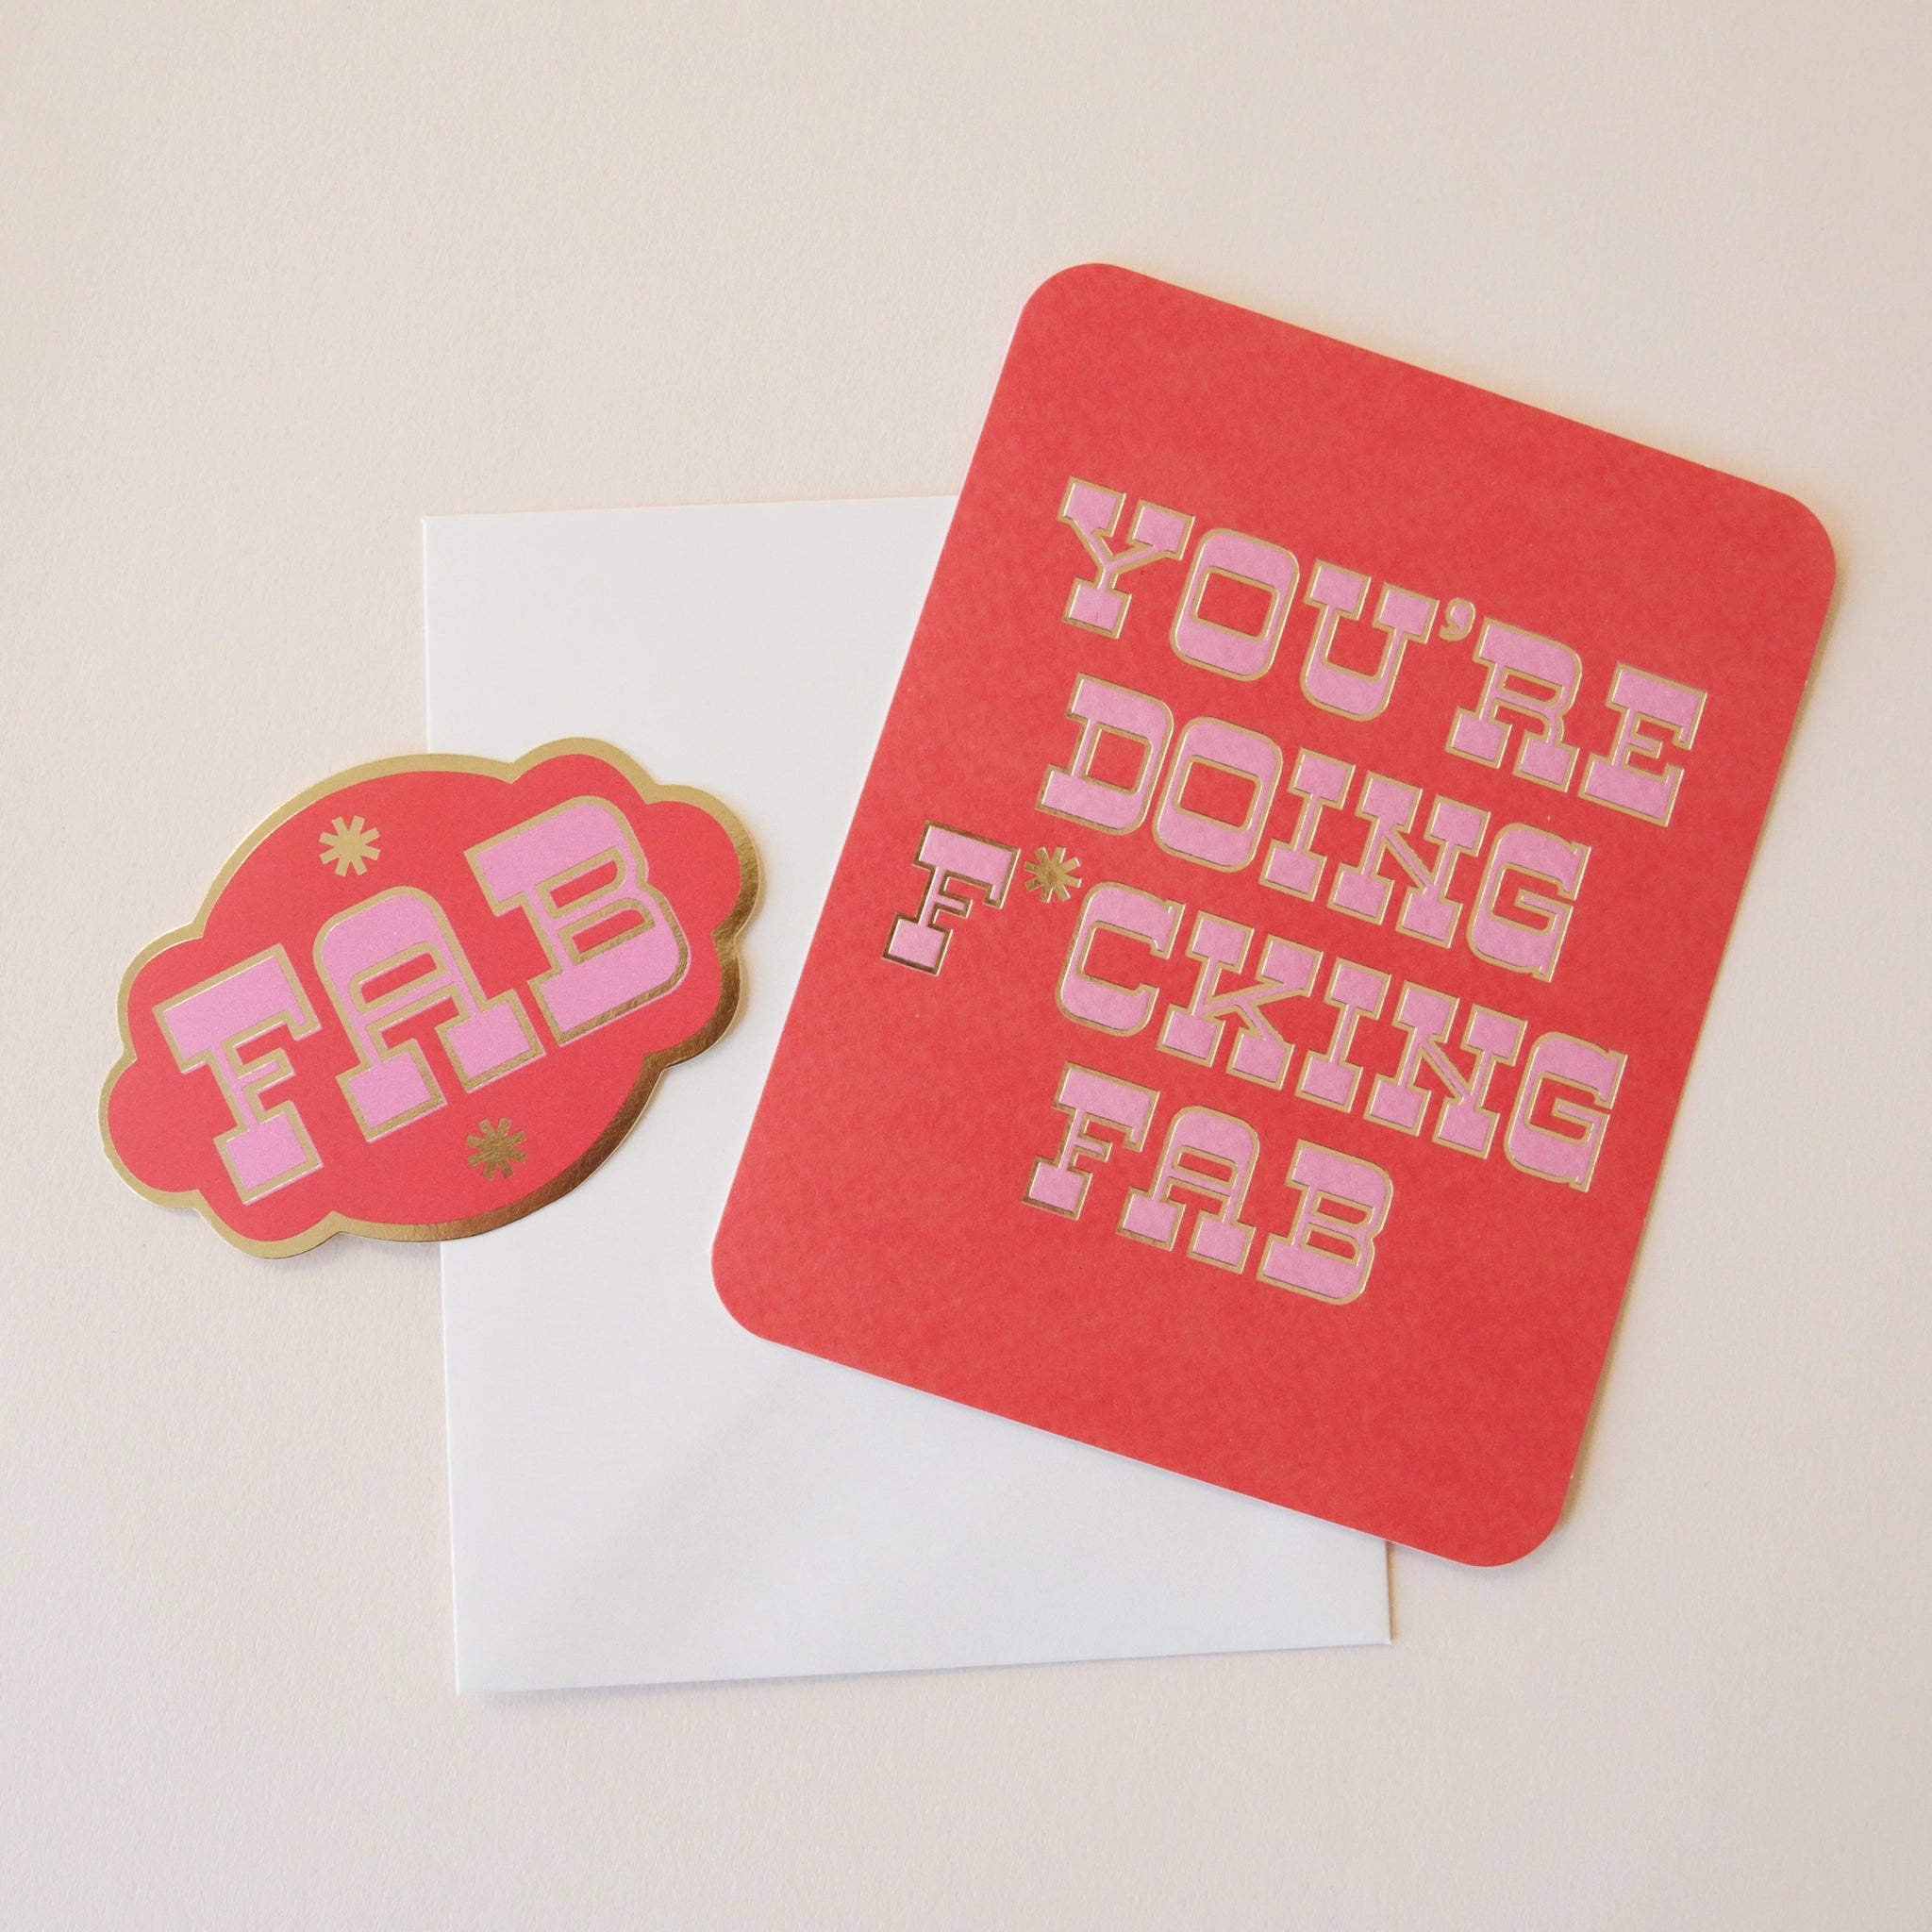 A red card with pink western style text that reads, "You're Doing F*cking Fab" along with a white envelope and a coordinating red sticker that has the same style font and says, "FAB".